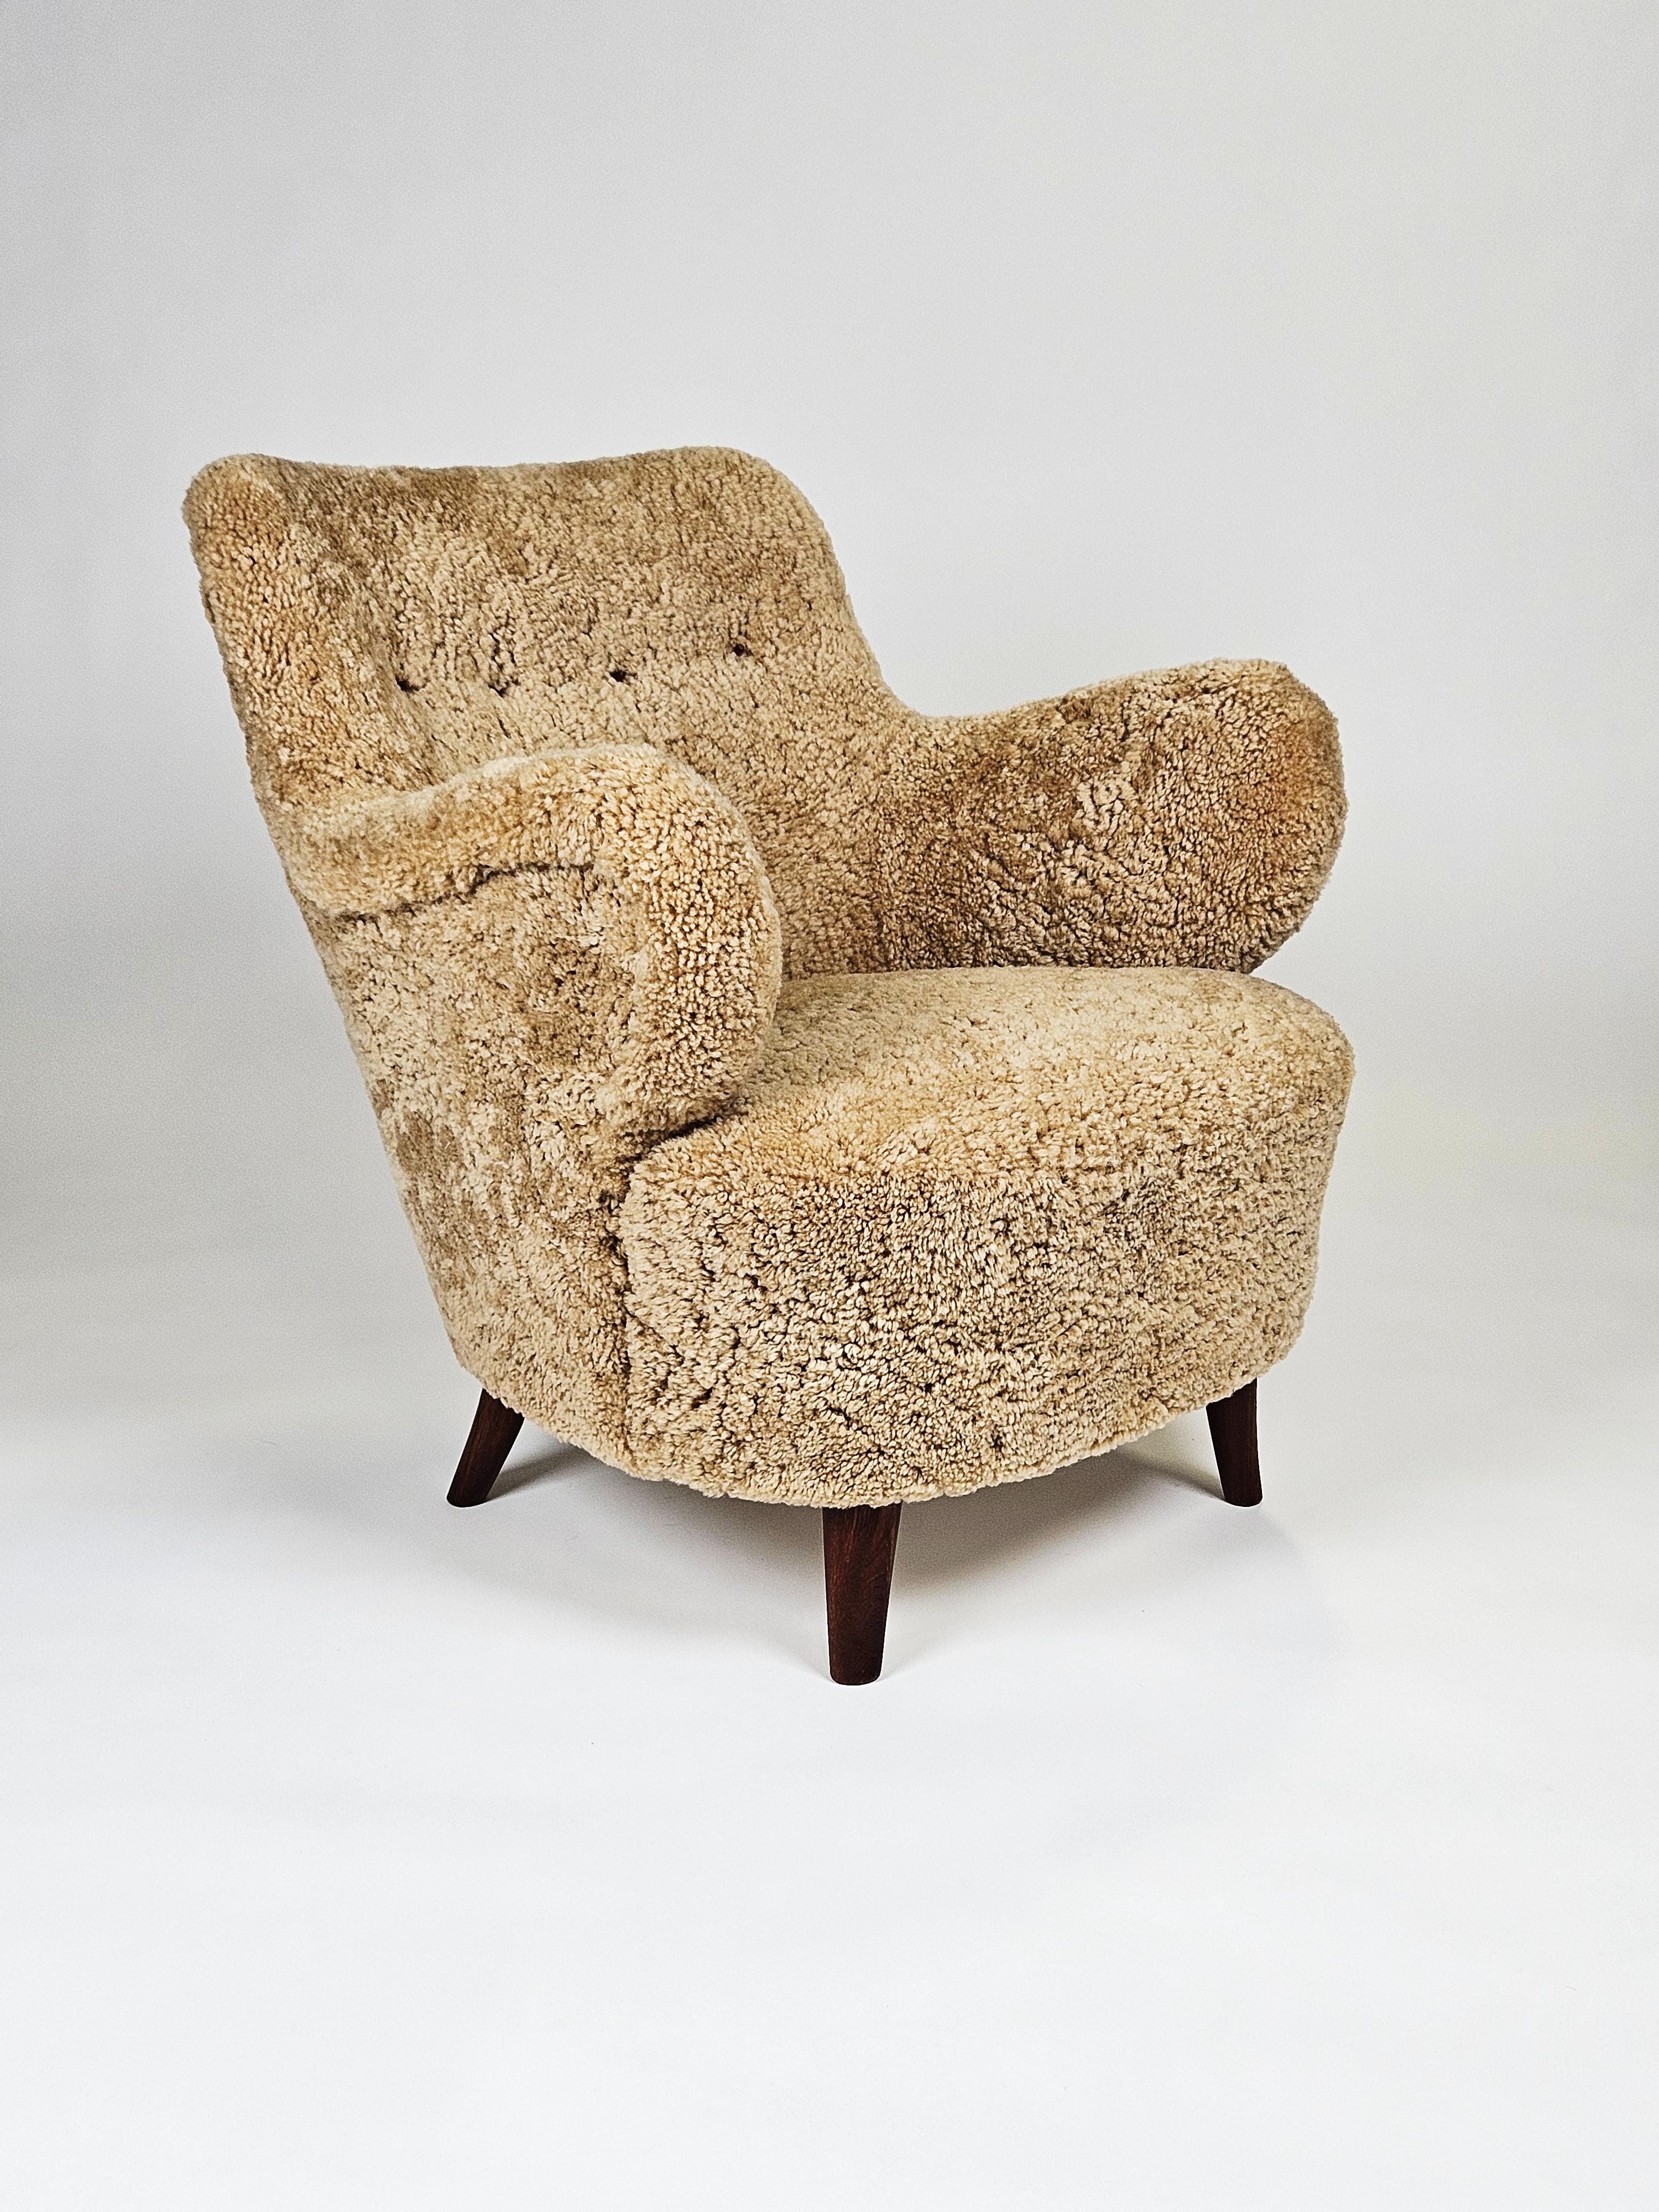 Very rare Swedish Modern lounge chair by Gustav Axel Berg, Sweden, 1940s For Sale 2